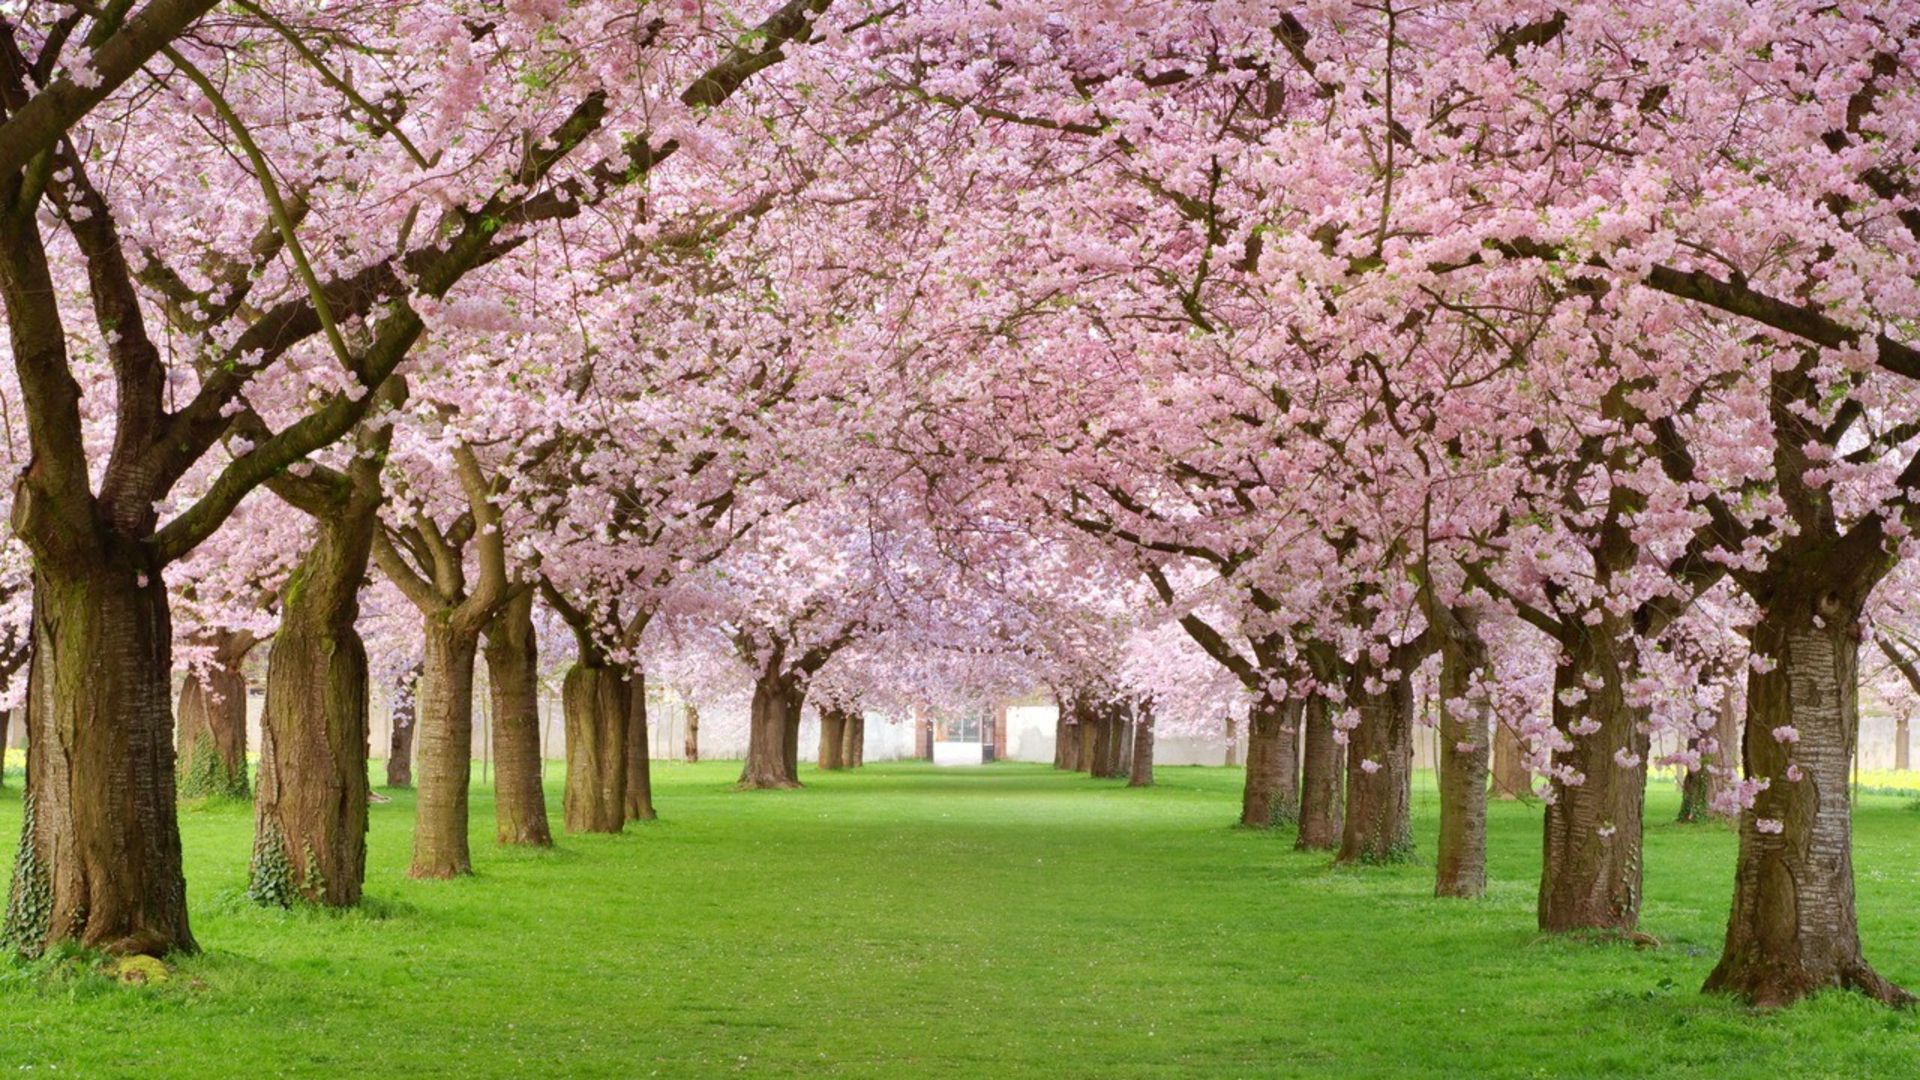 Beautiful Spring images download Wallpapers, Backgrounds, Images